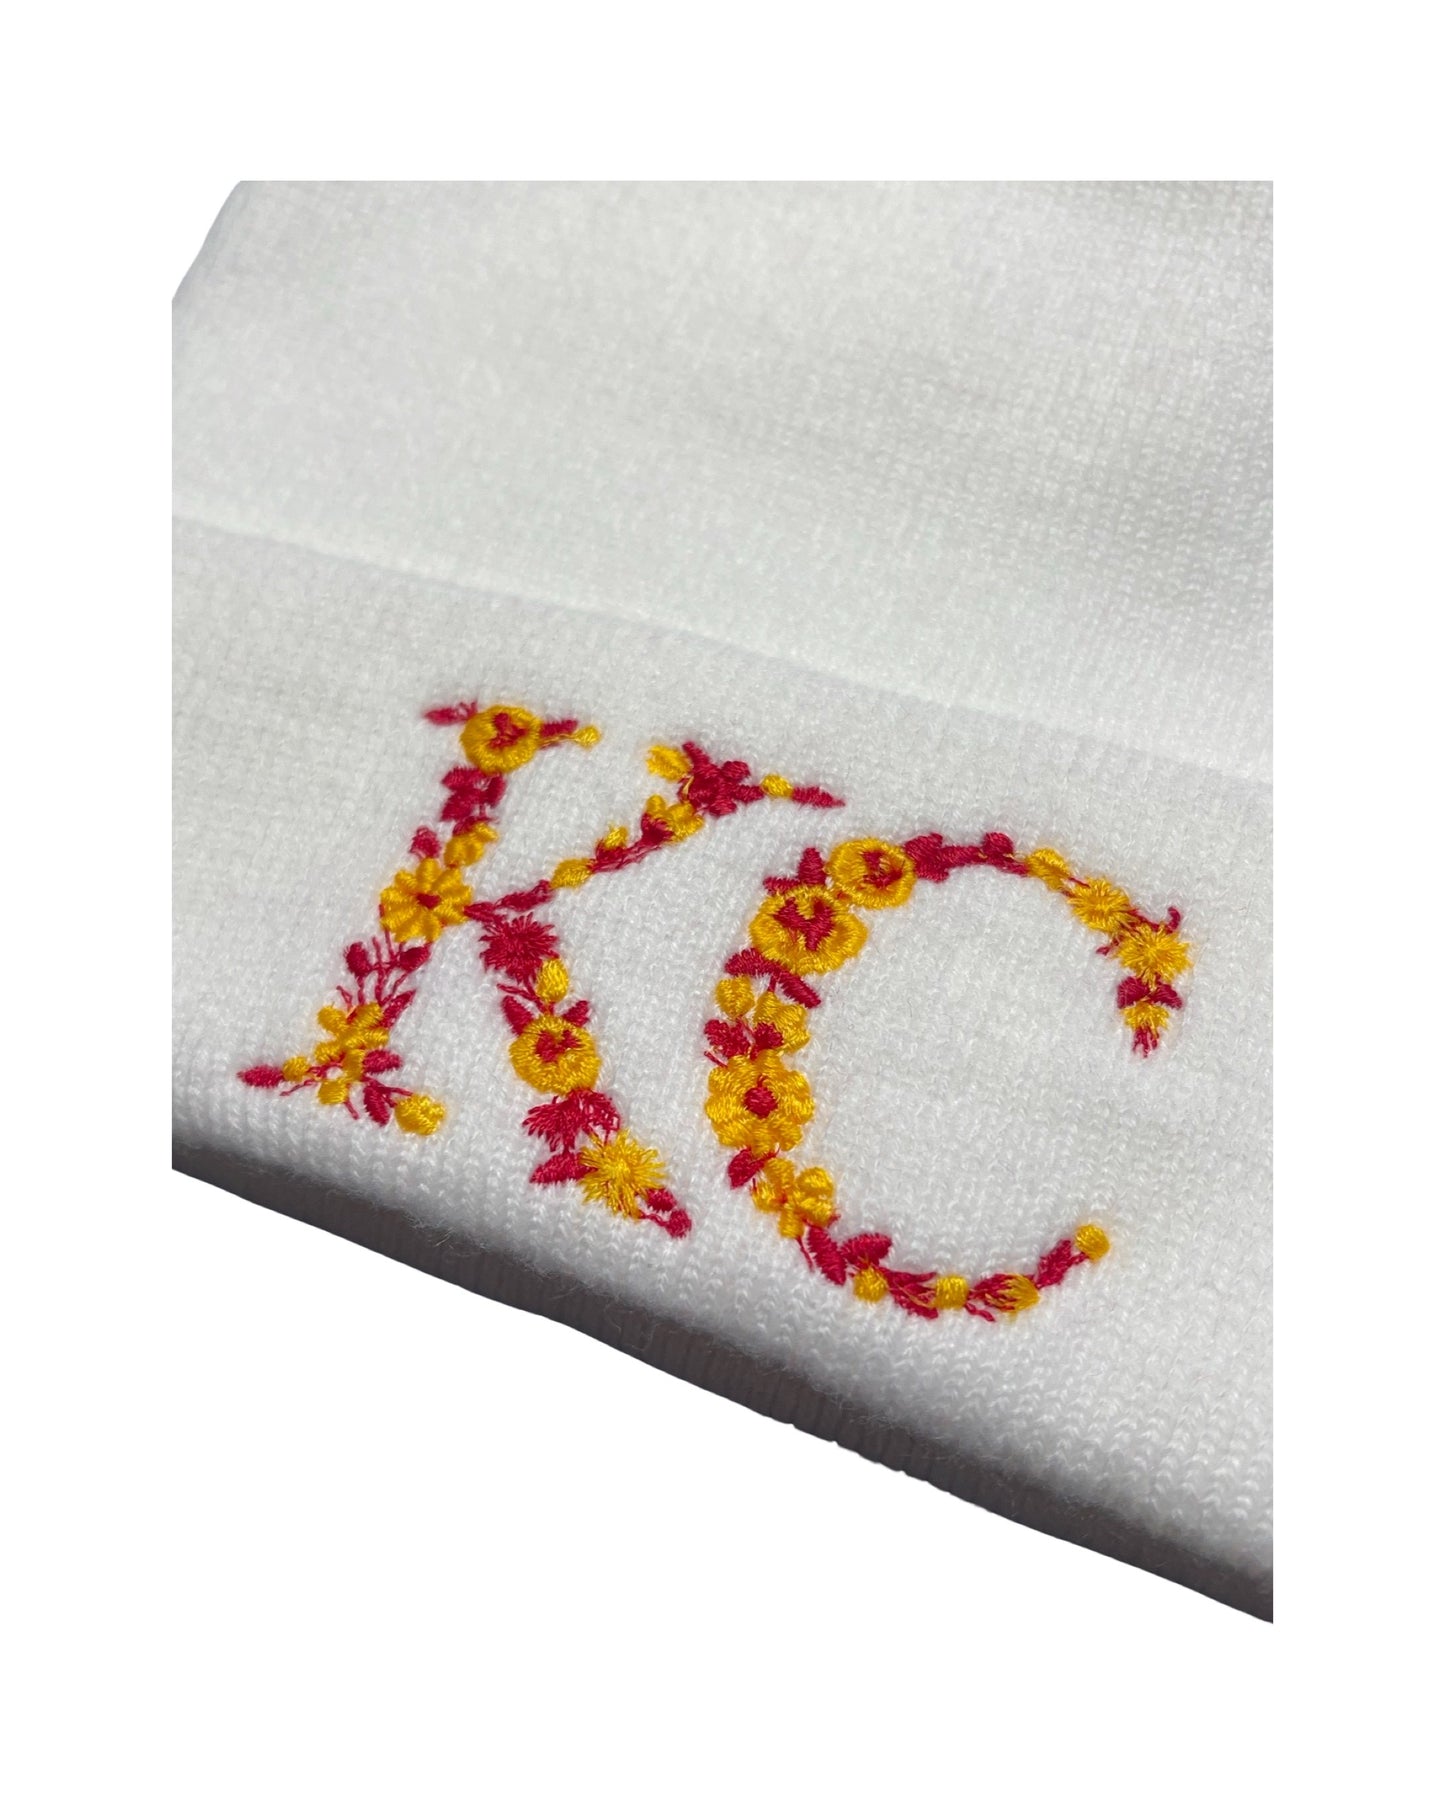 close up of embroidery letters KC in kc chiefs red and yellow flowers